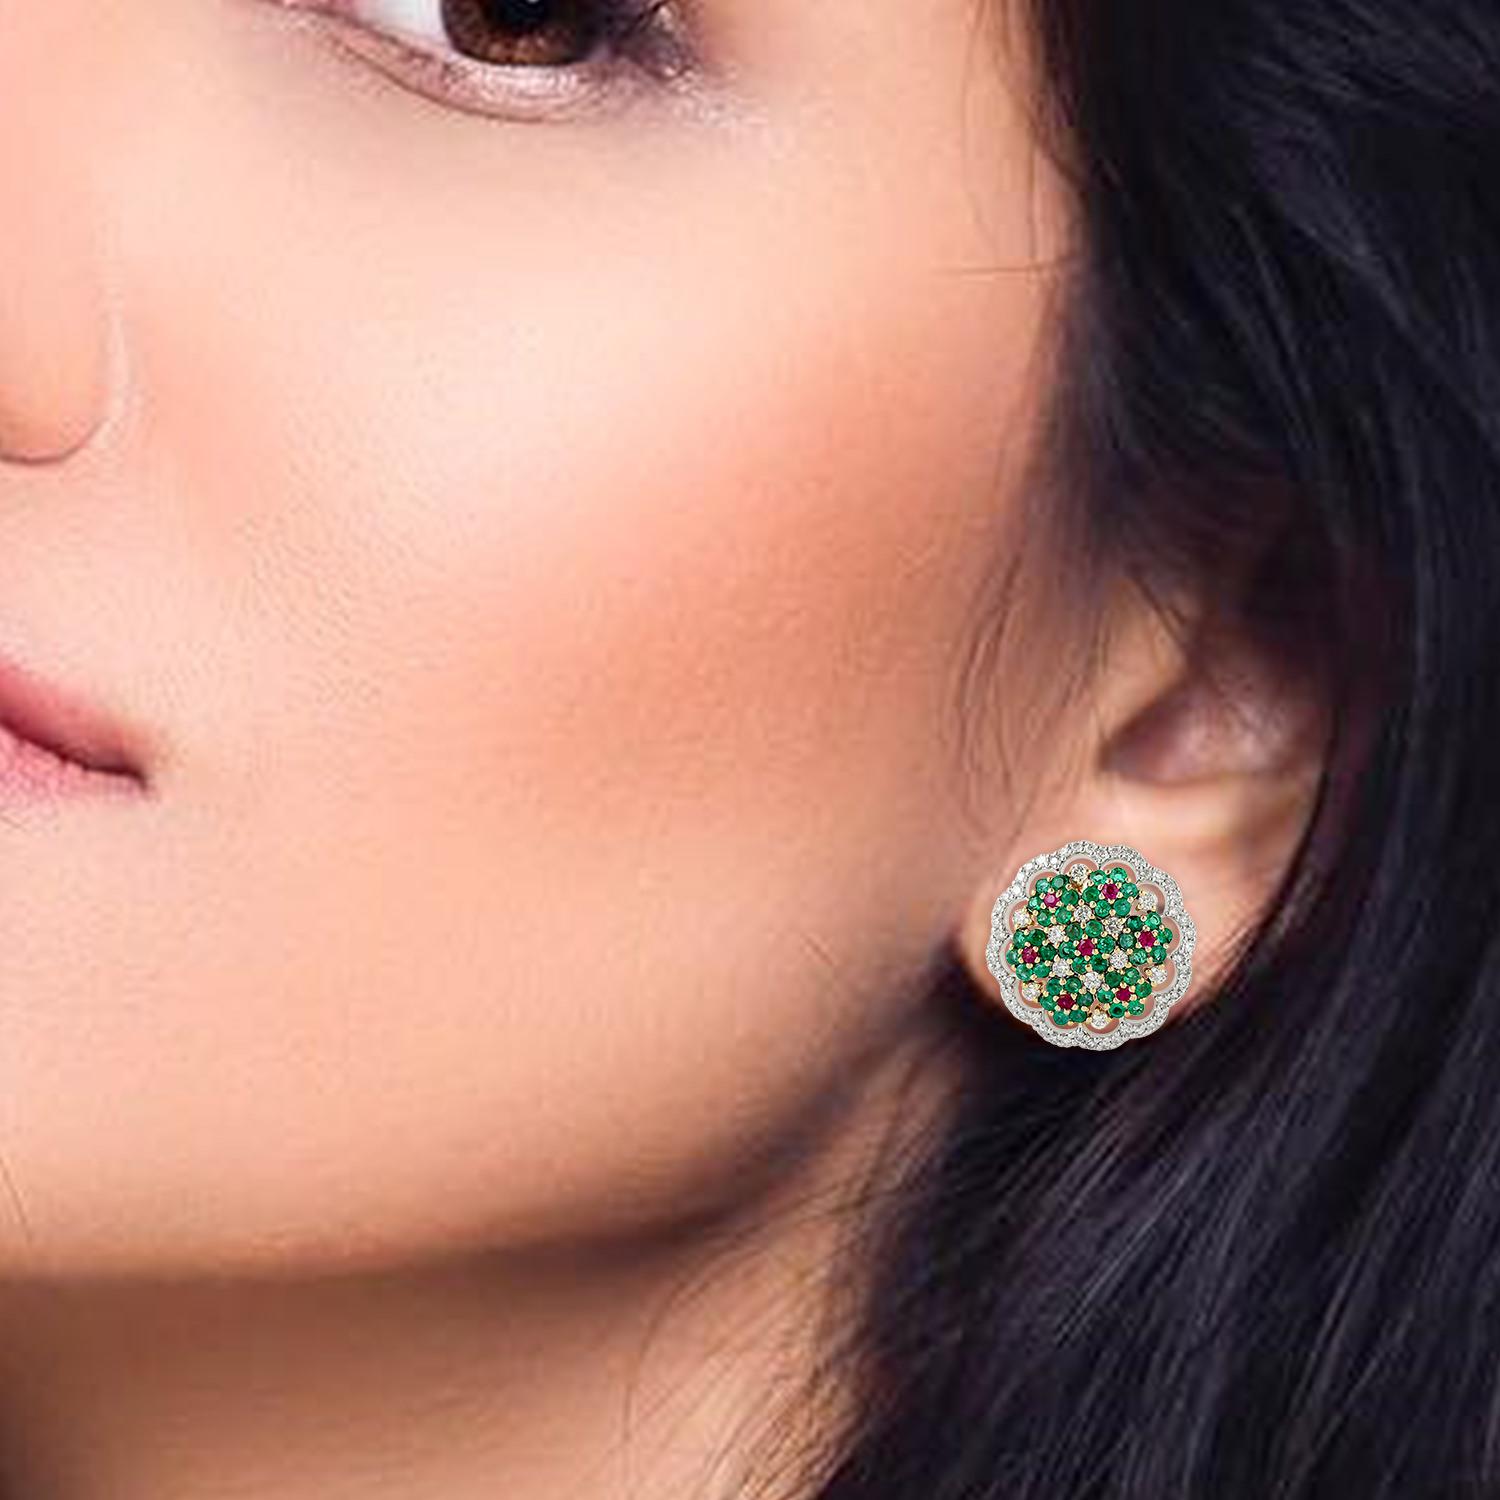 These beautiful stud earrings are handmade in 18K gold.  It is set with .89 carats emerald, .25 carats ruby & .95 carats of sparkling diamonds.

FOLLOW  MEGHNA JEWELS storefront to view the latest collection & exclusive pieces.  Meghna Jewels is